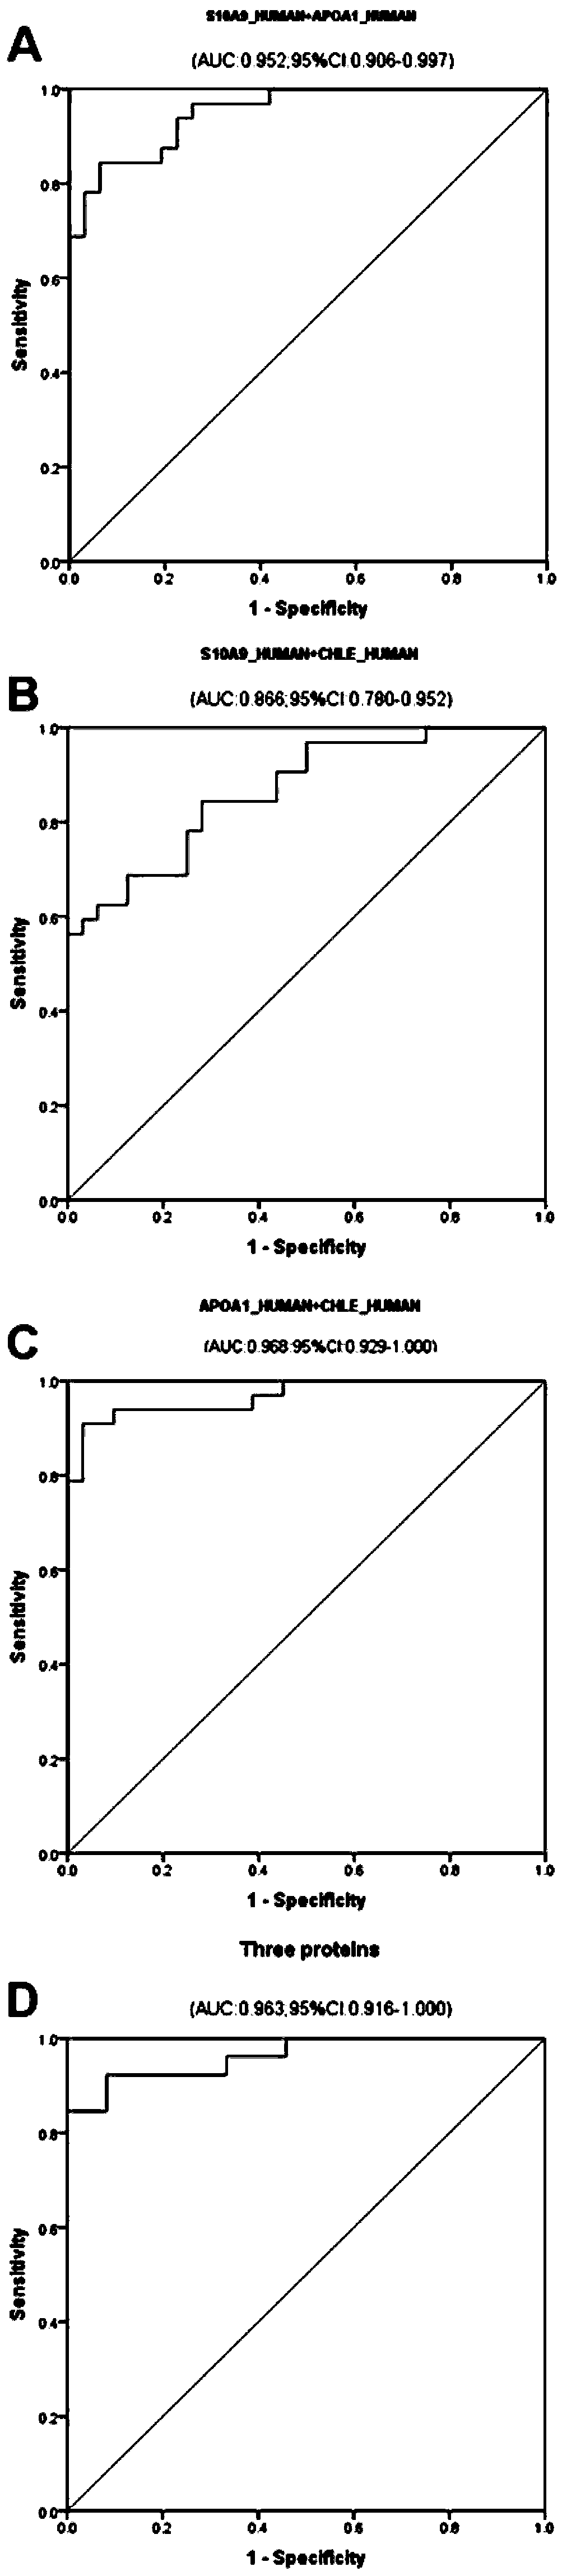 Serum/plasma protein molecular marker related to auxiliary diagnosis of intrahepatic cholestasis in gestation period and application thereof